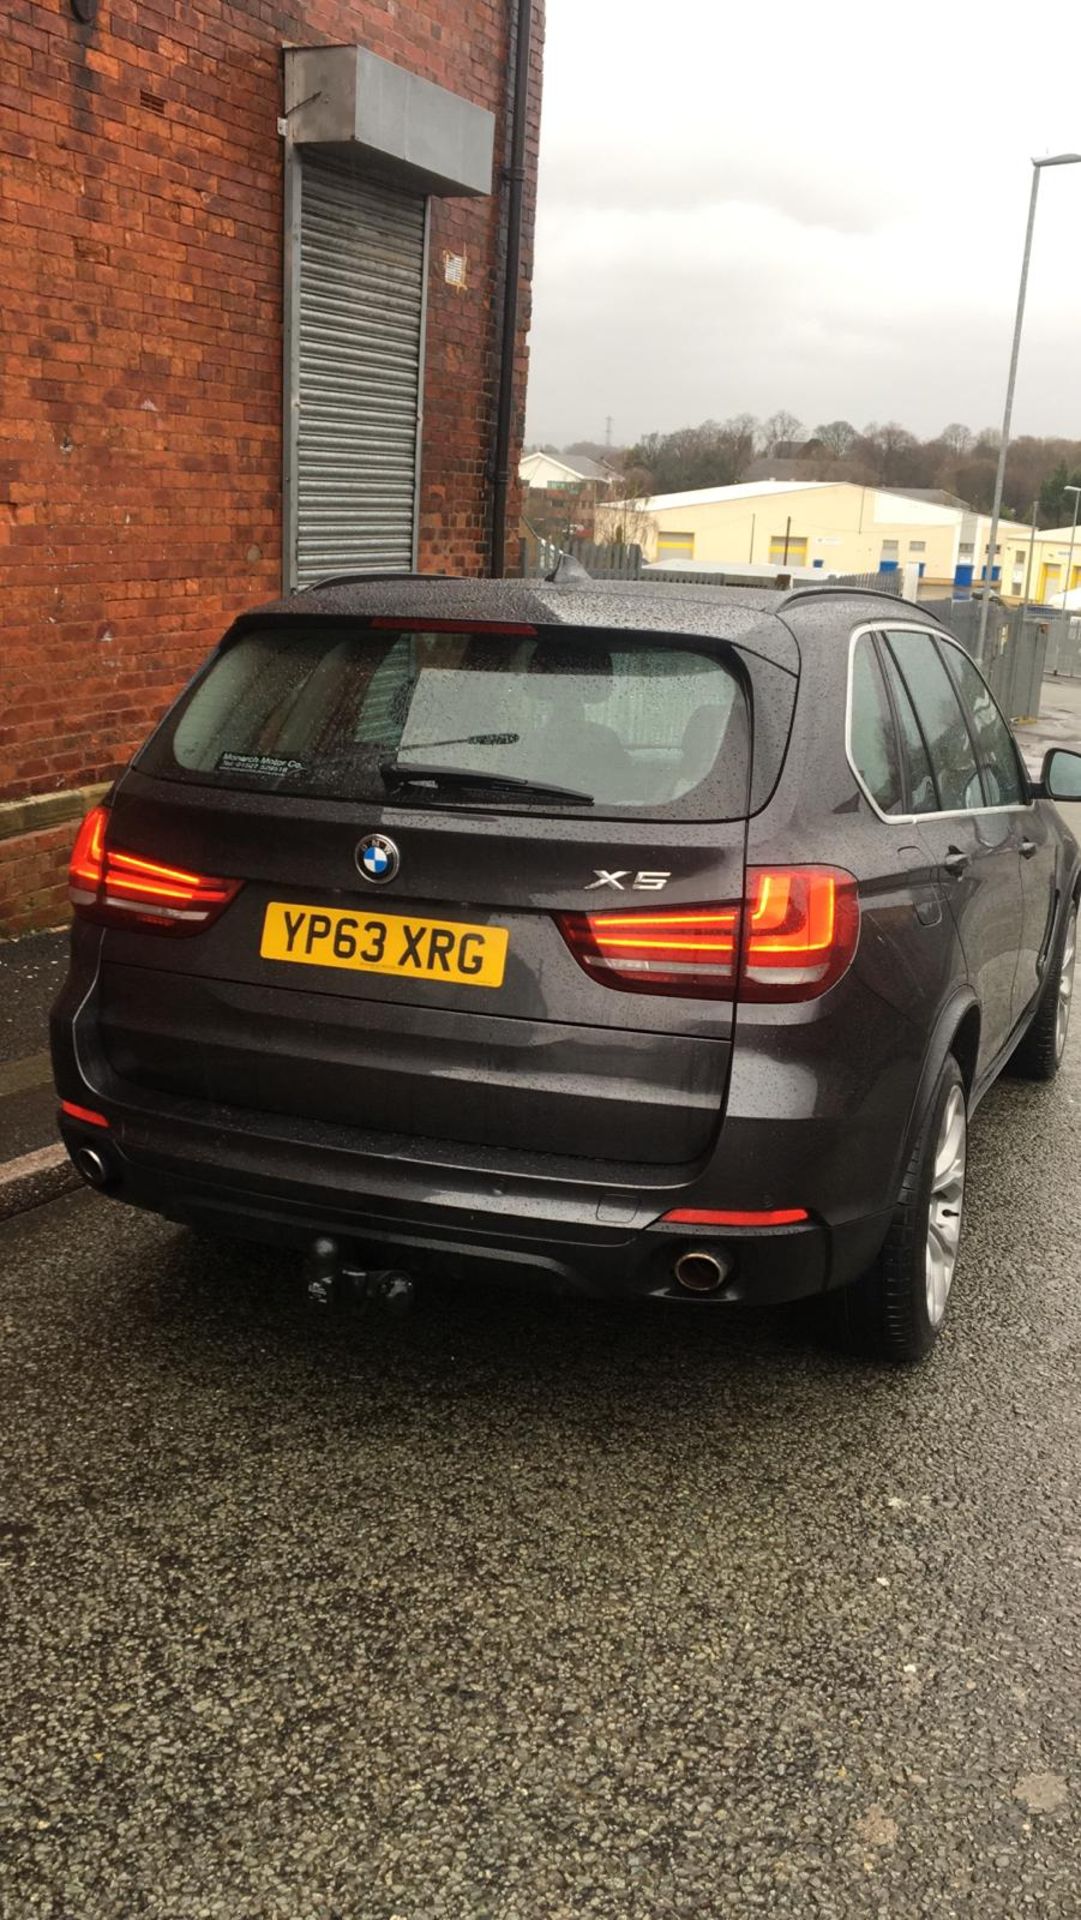 2013/63 REG BMW X5 XDRIVE 30D SE AUTOMATIC 3.0 DIESEL GREY 4X4, SHOWING 1 FORMER KEEPER *NO VAT* - Image 3 of 7